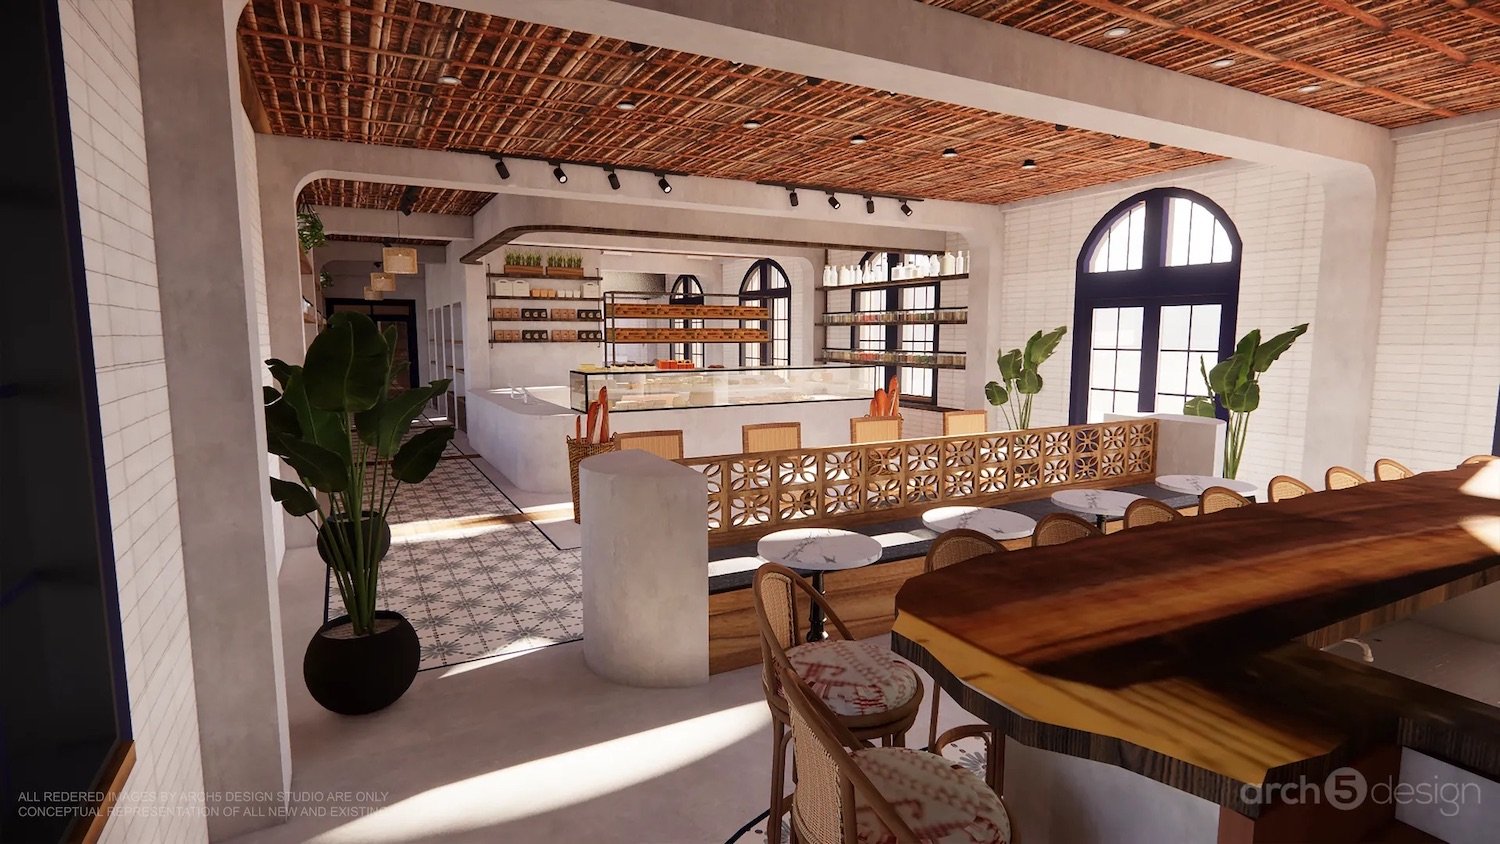 Interior rendering of new San Diego restaurant Wildflour Delicatessen a new deli, cocktail bar, and bakery coming to Liberty Station